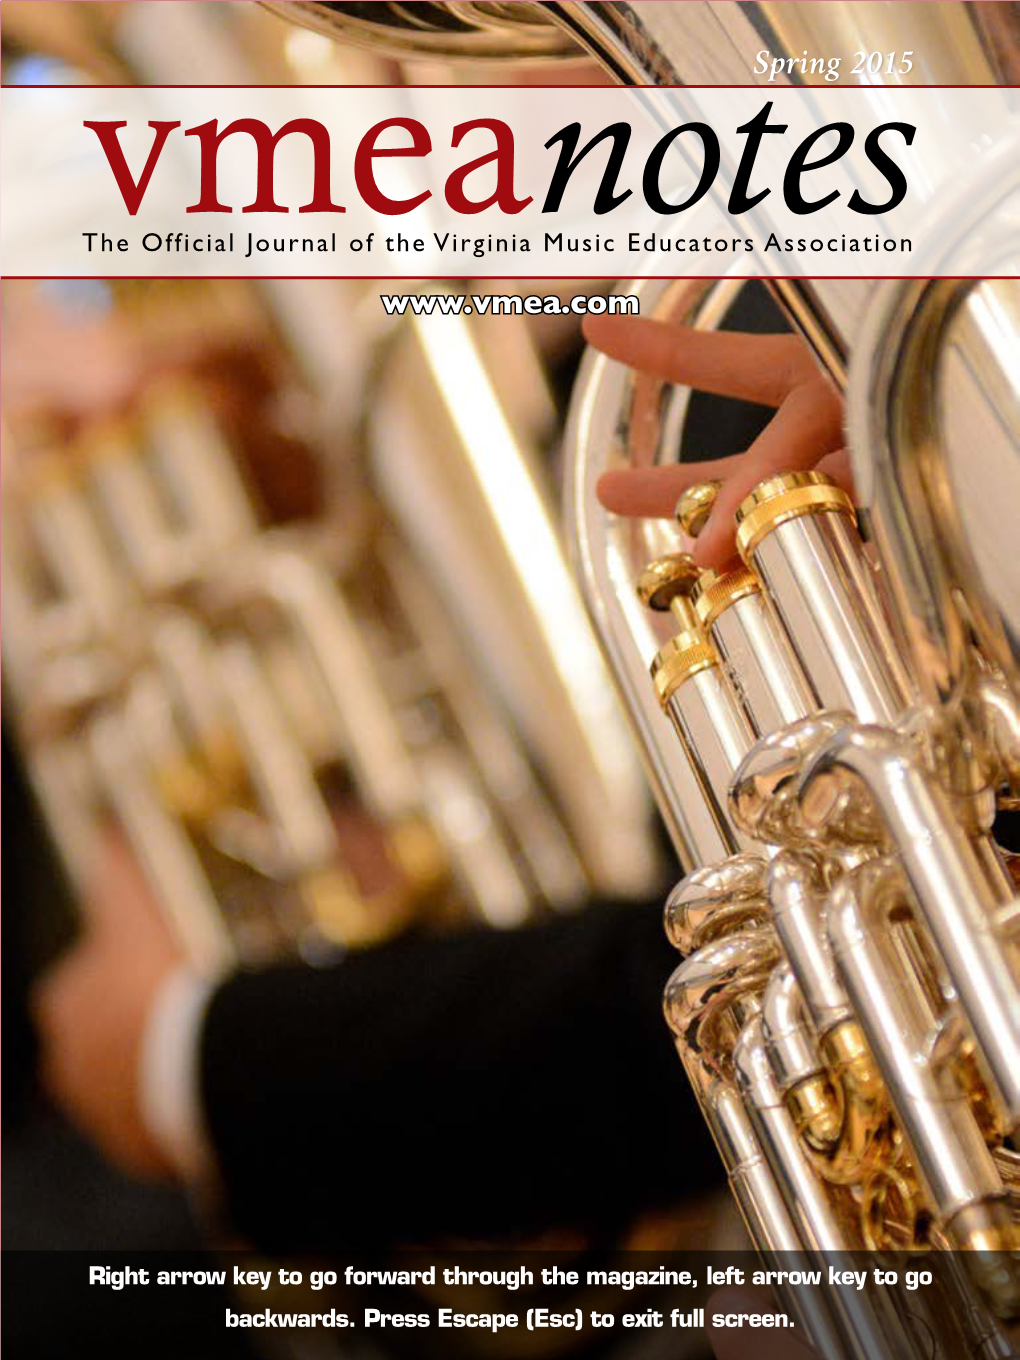 Spring 2015 the Official Journal of the Virginia Notesmusic Educators Association